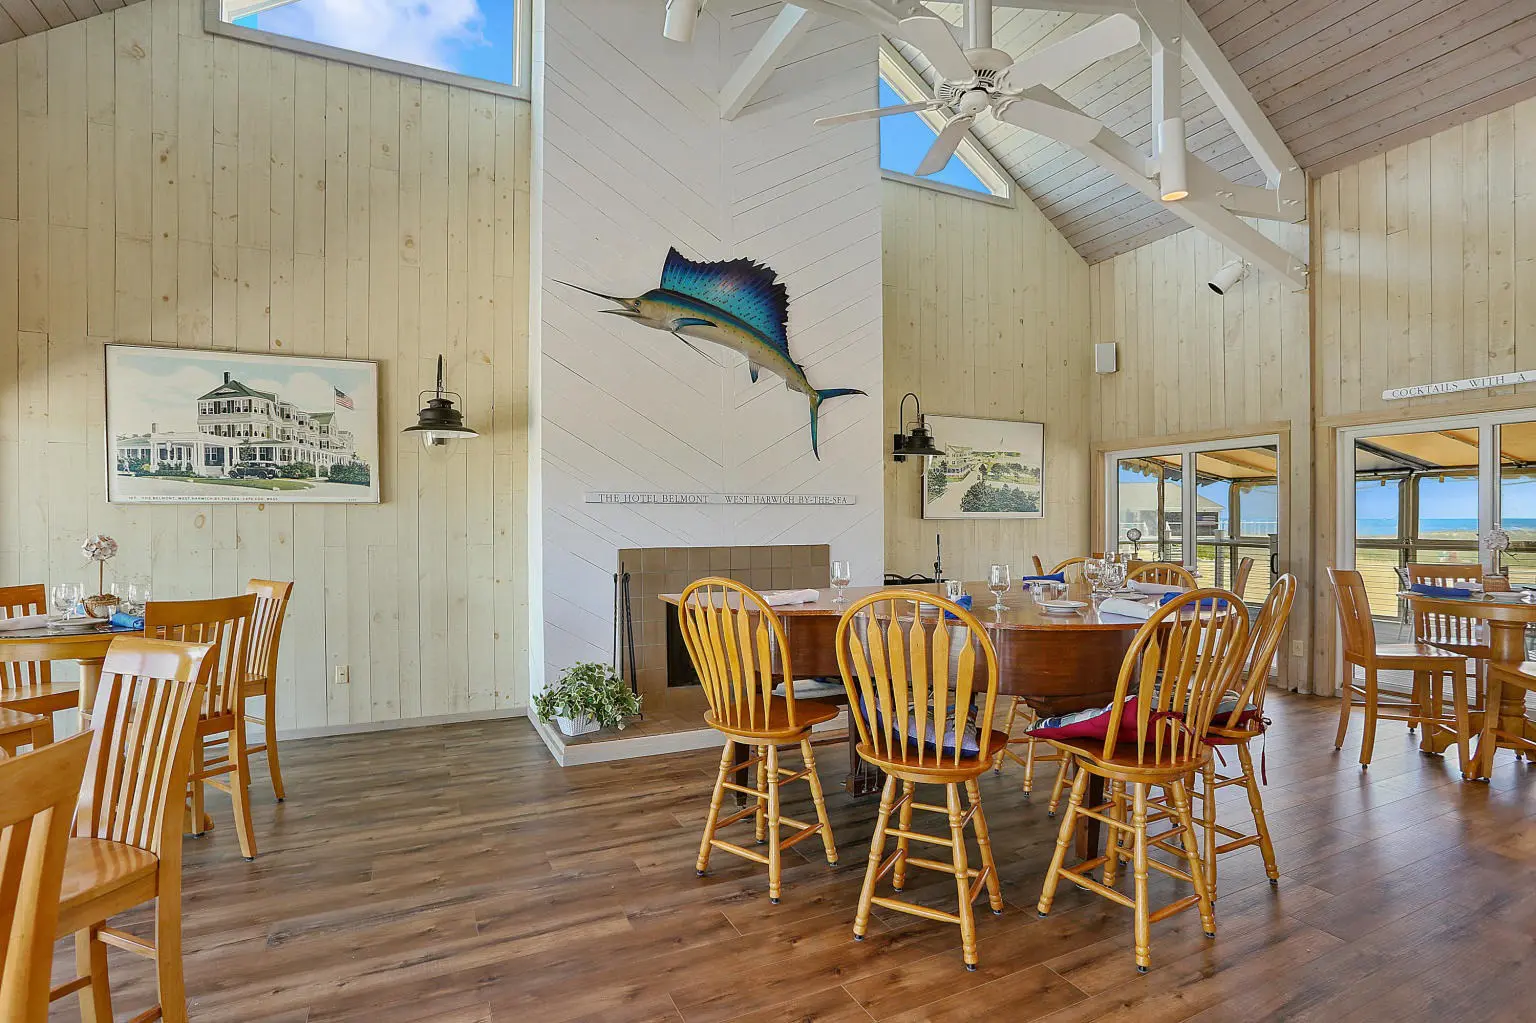 A dining room with wooden chairs and a fish on the wall.